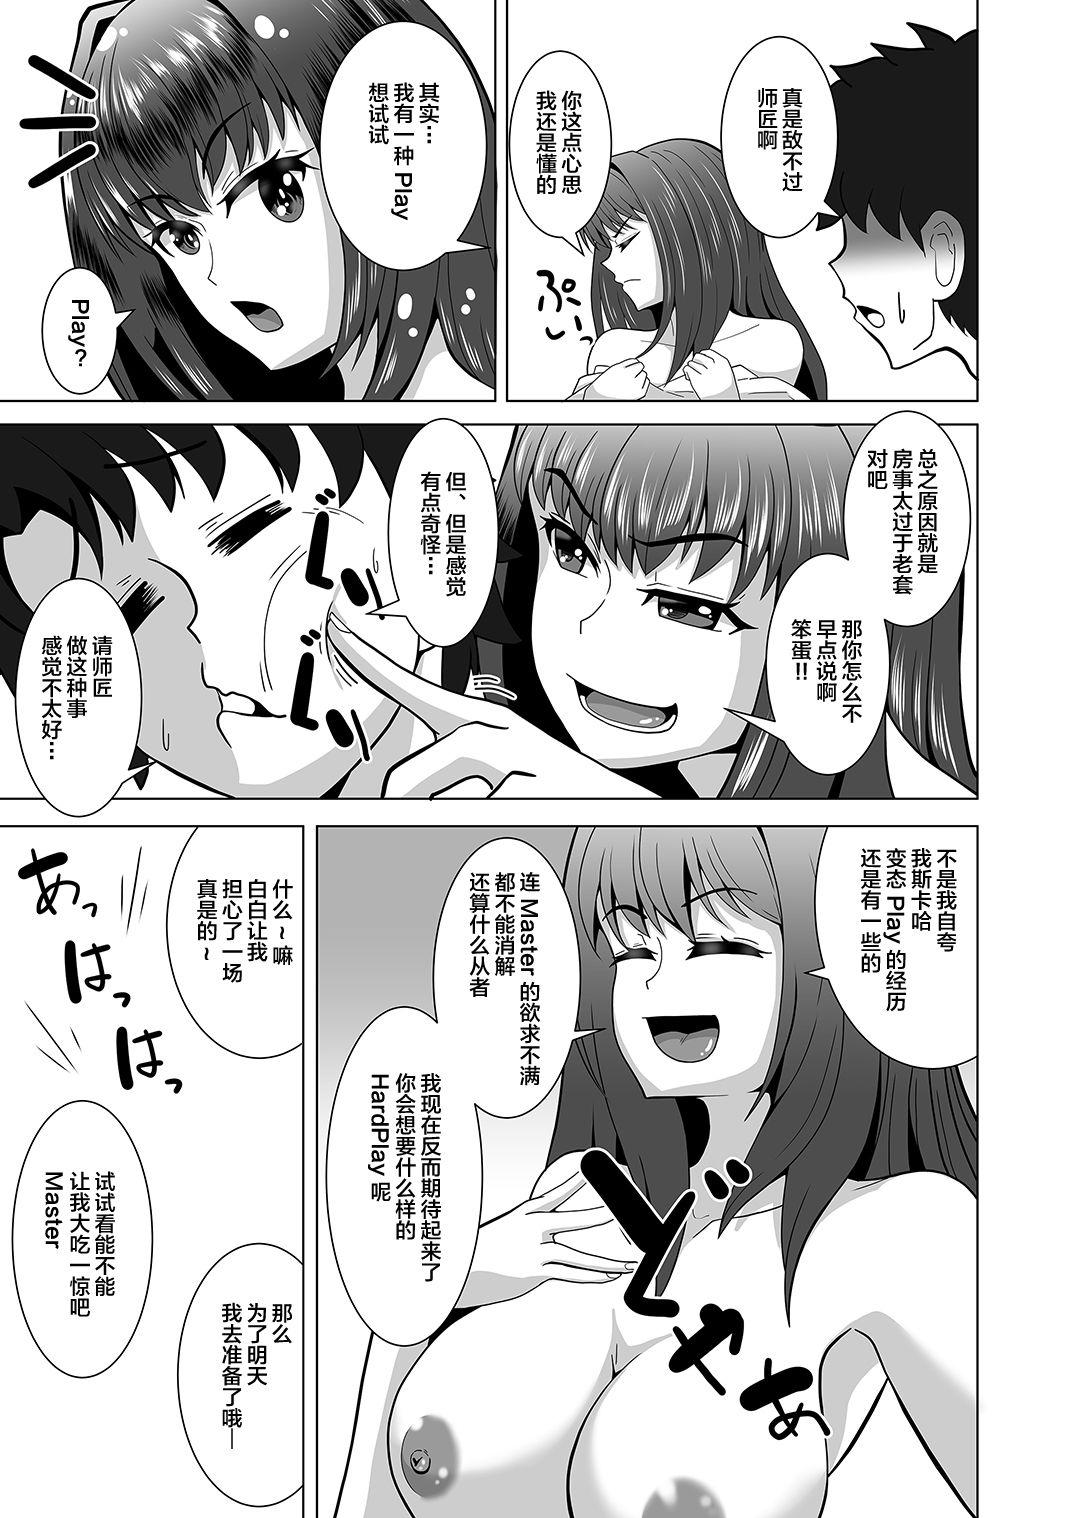 Chubby Scathach-chan to Issho - Fate grand order Long Hair - Page 5